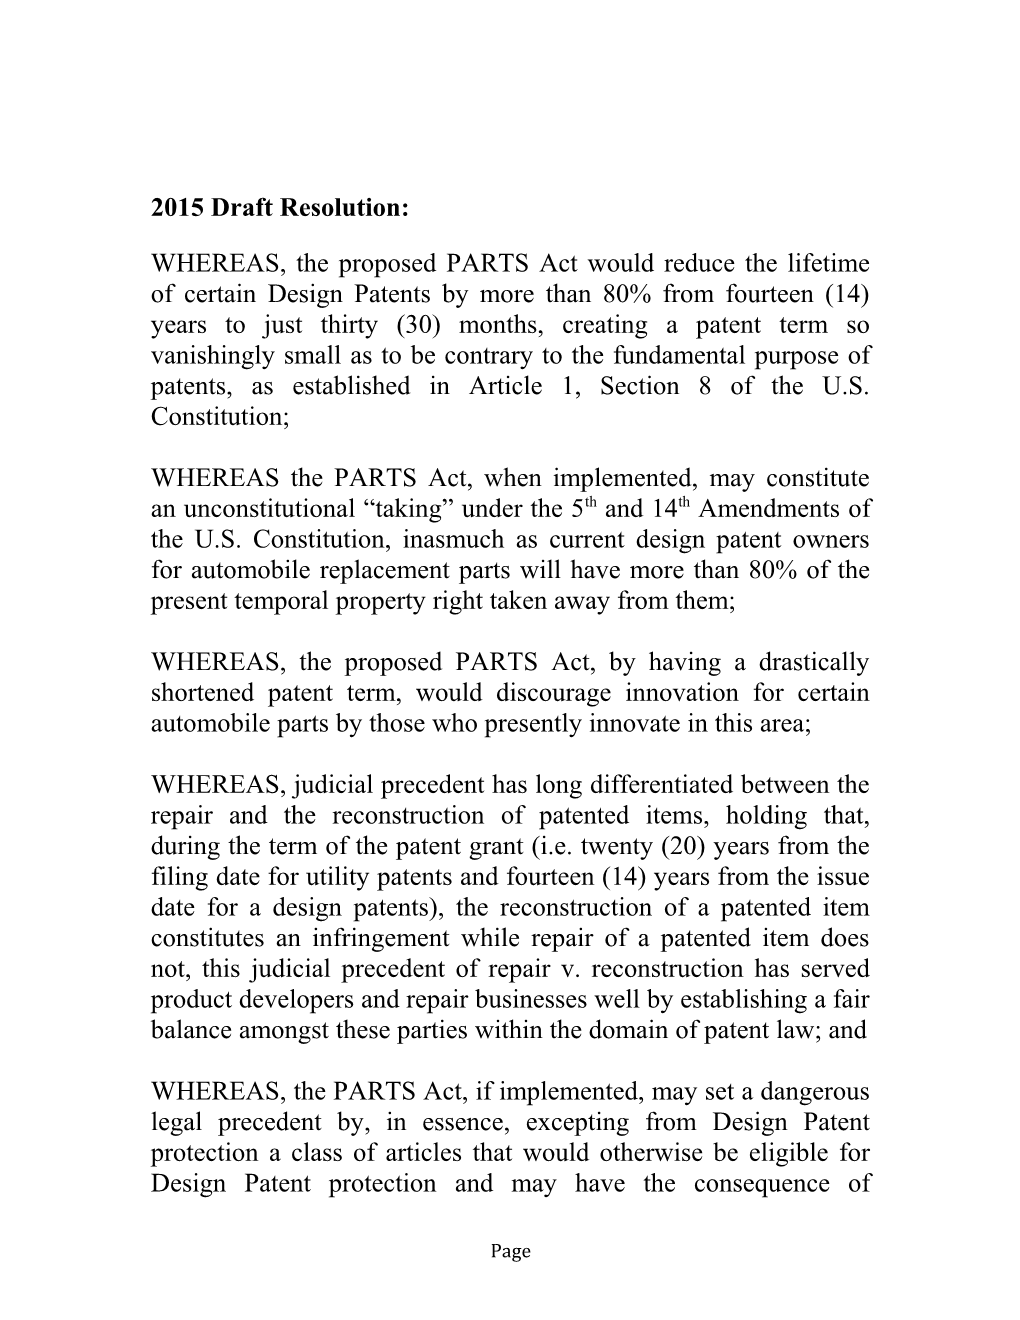 Draft Board Resolution on the 2015 PARTS Bill